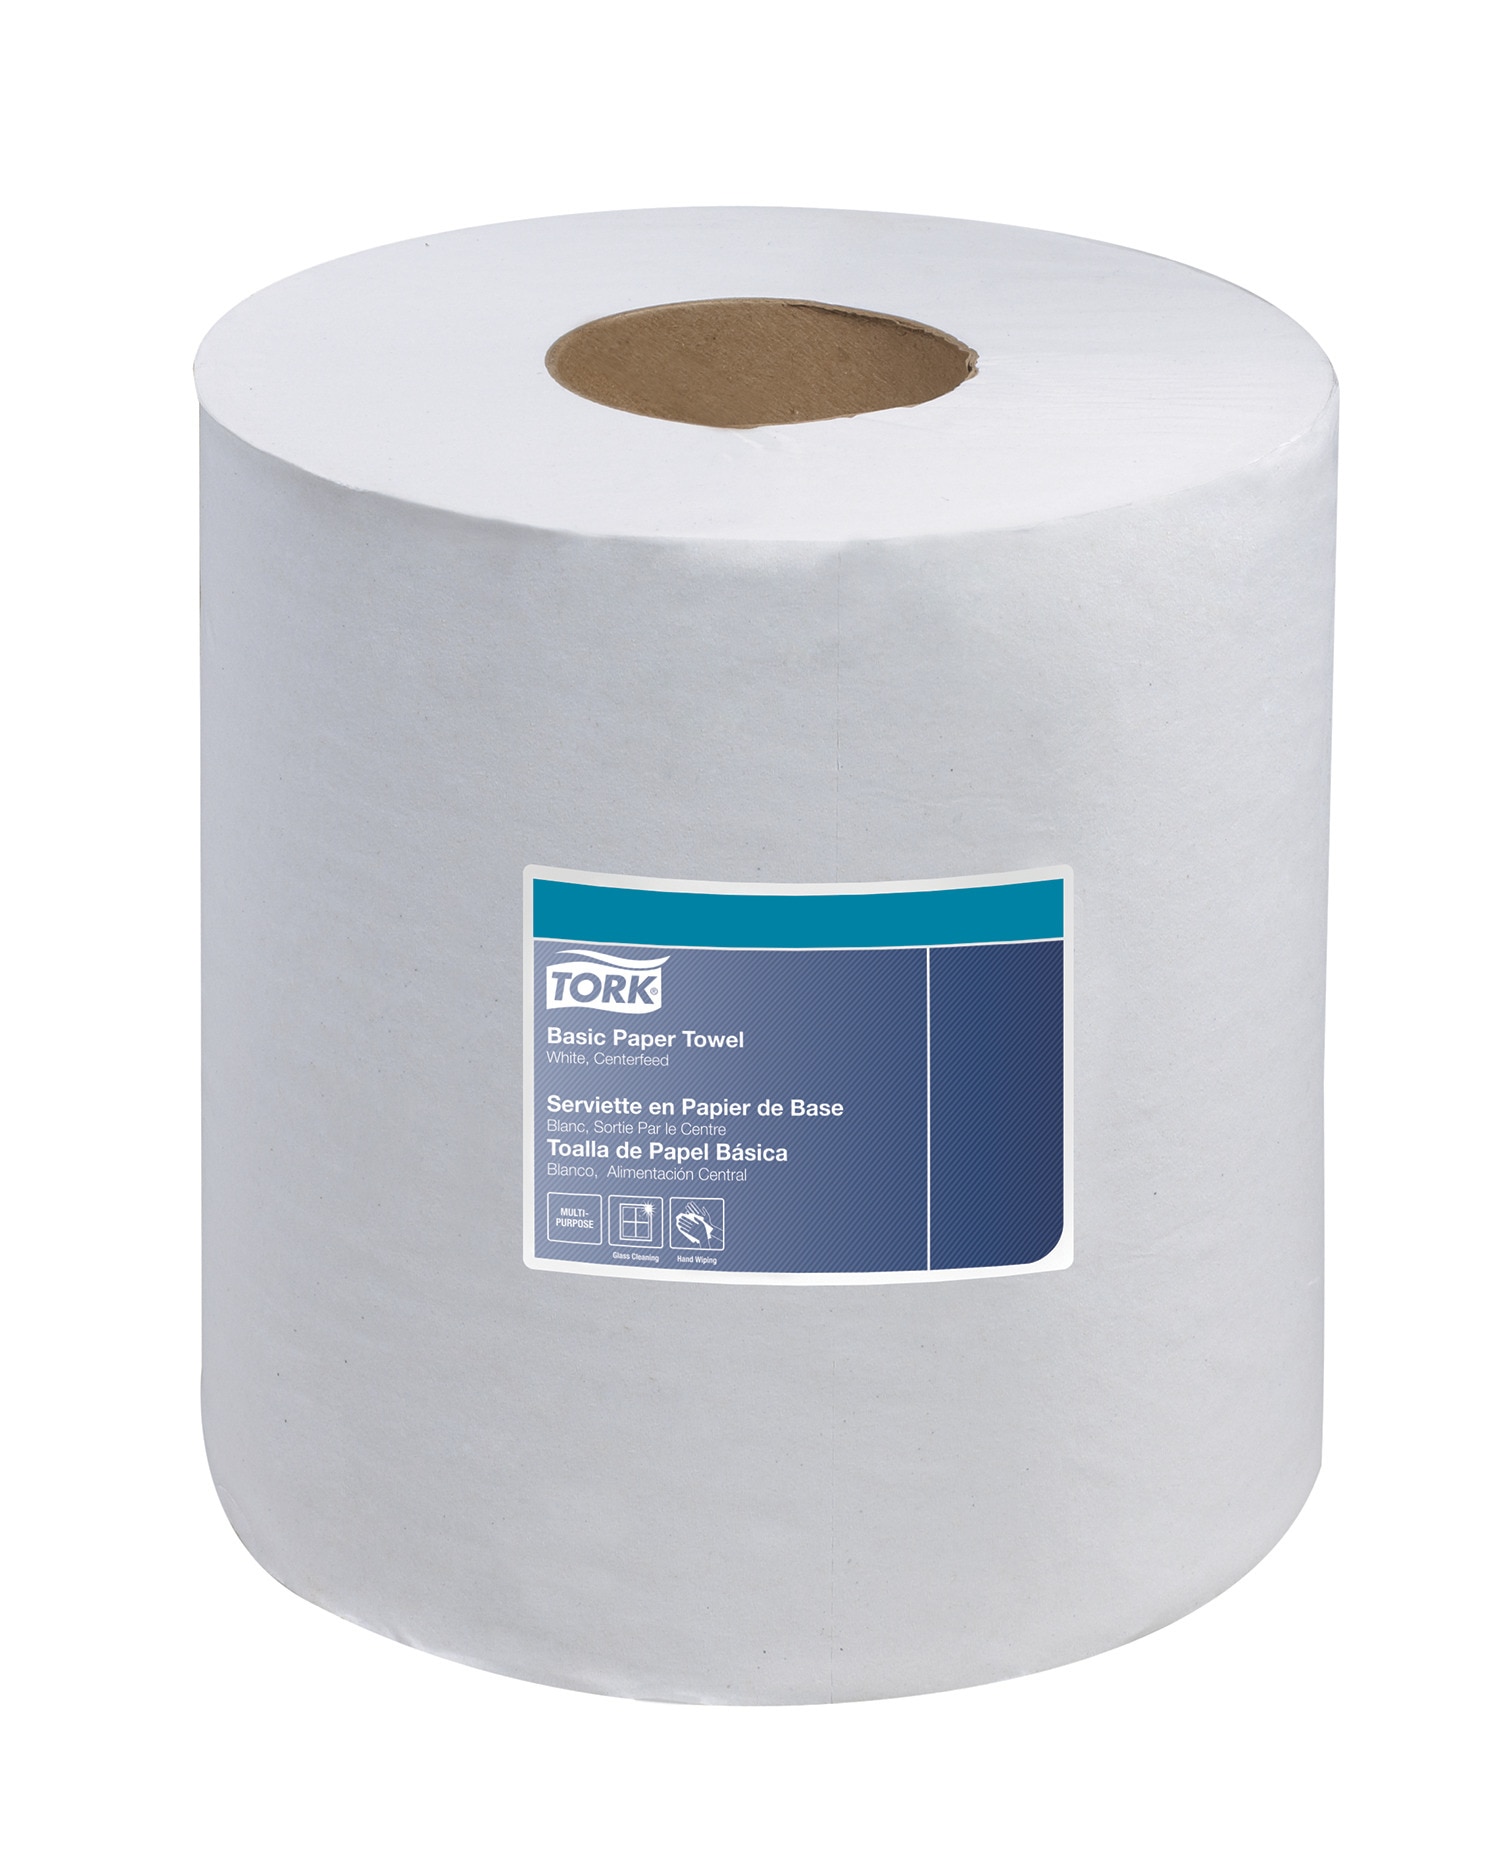 6 x Tork Basic Paper Centrefeed White Towel Rolls for M2 System 6x150m 2-PLY 